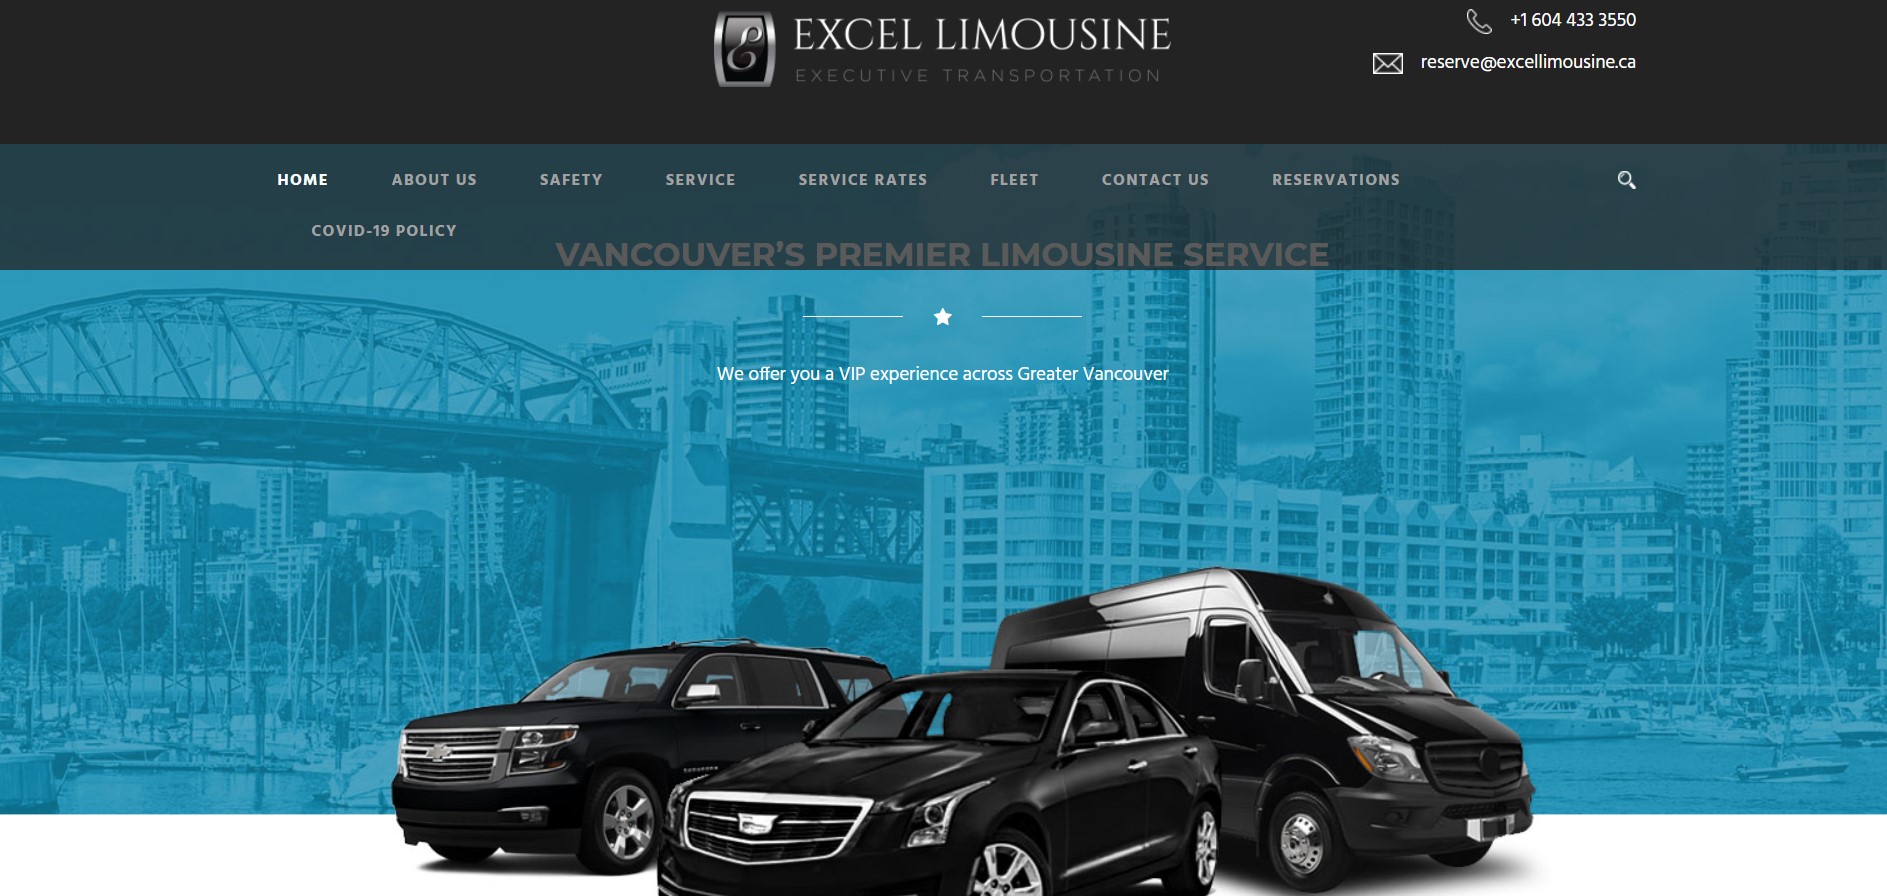 excel limousine limo hire in vancouver